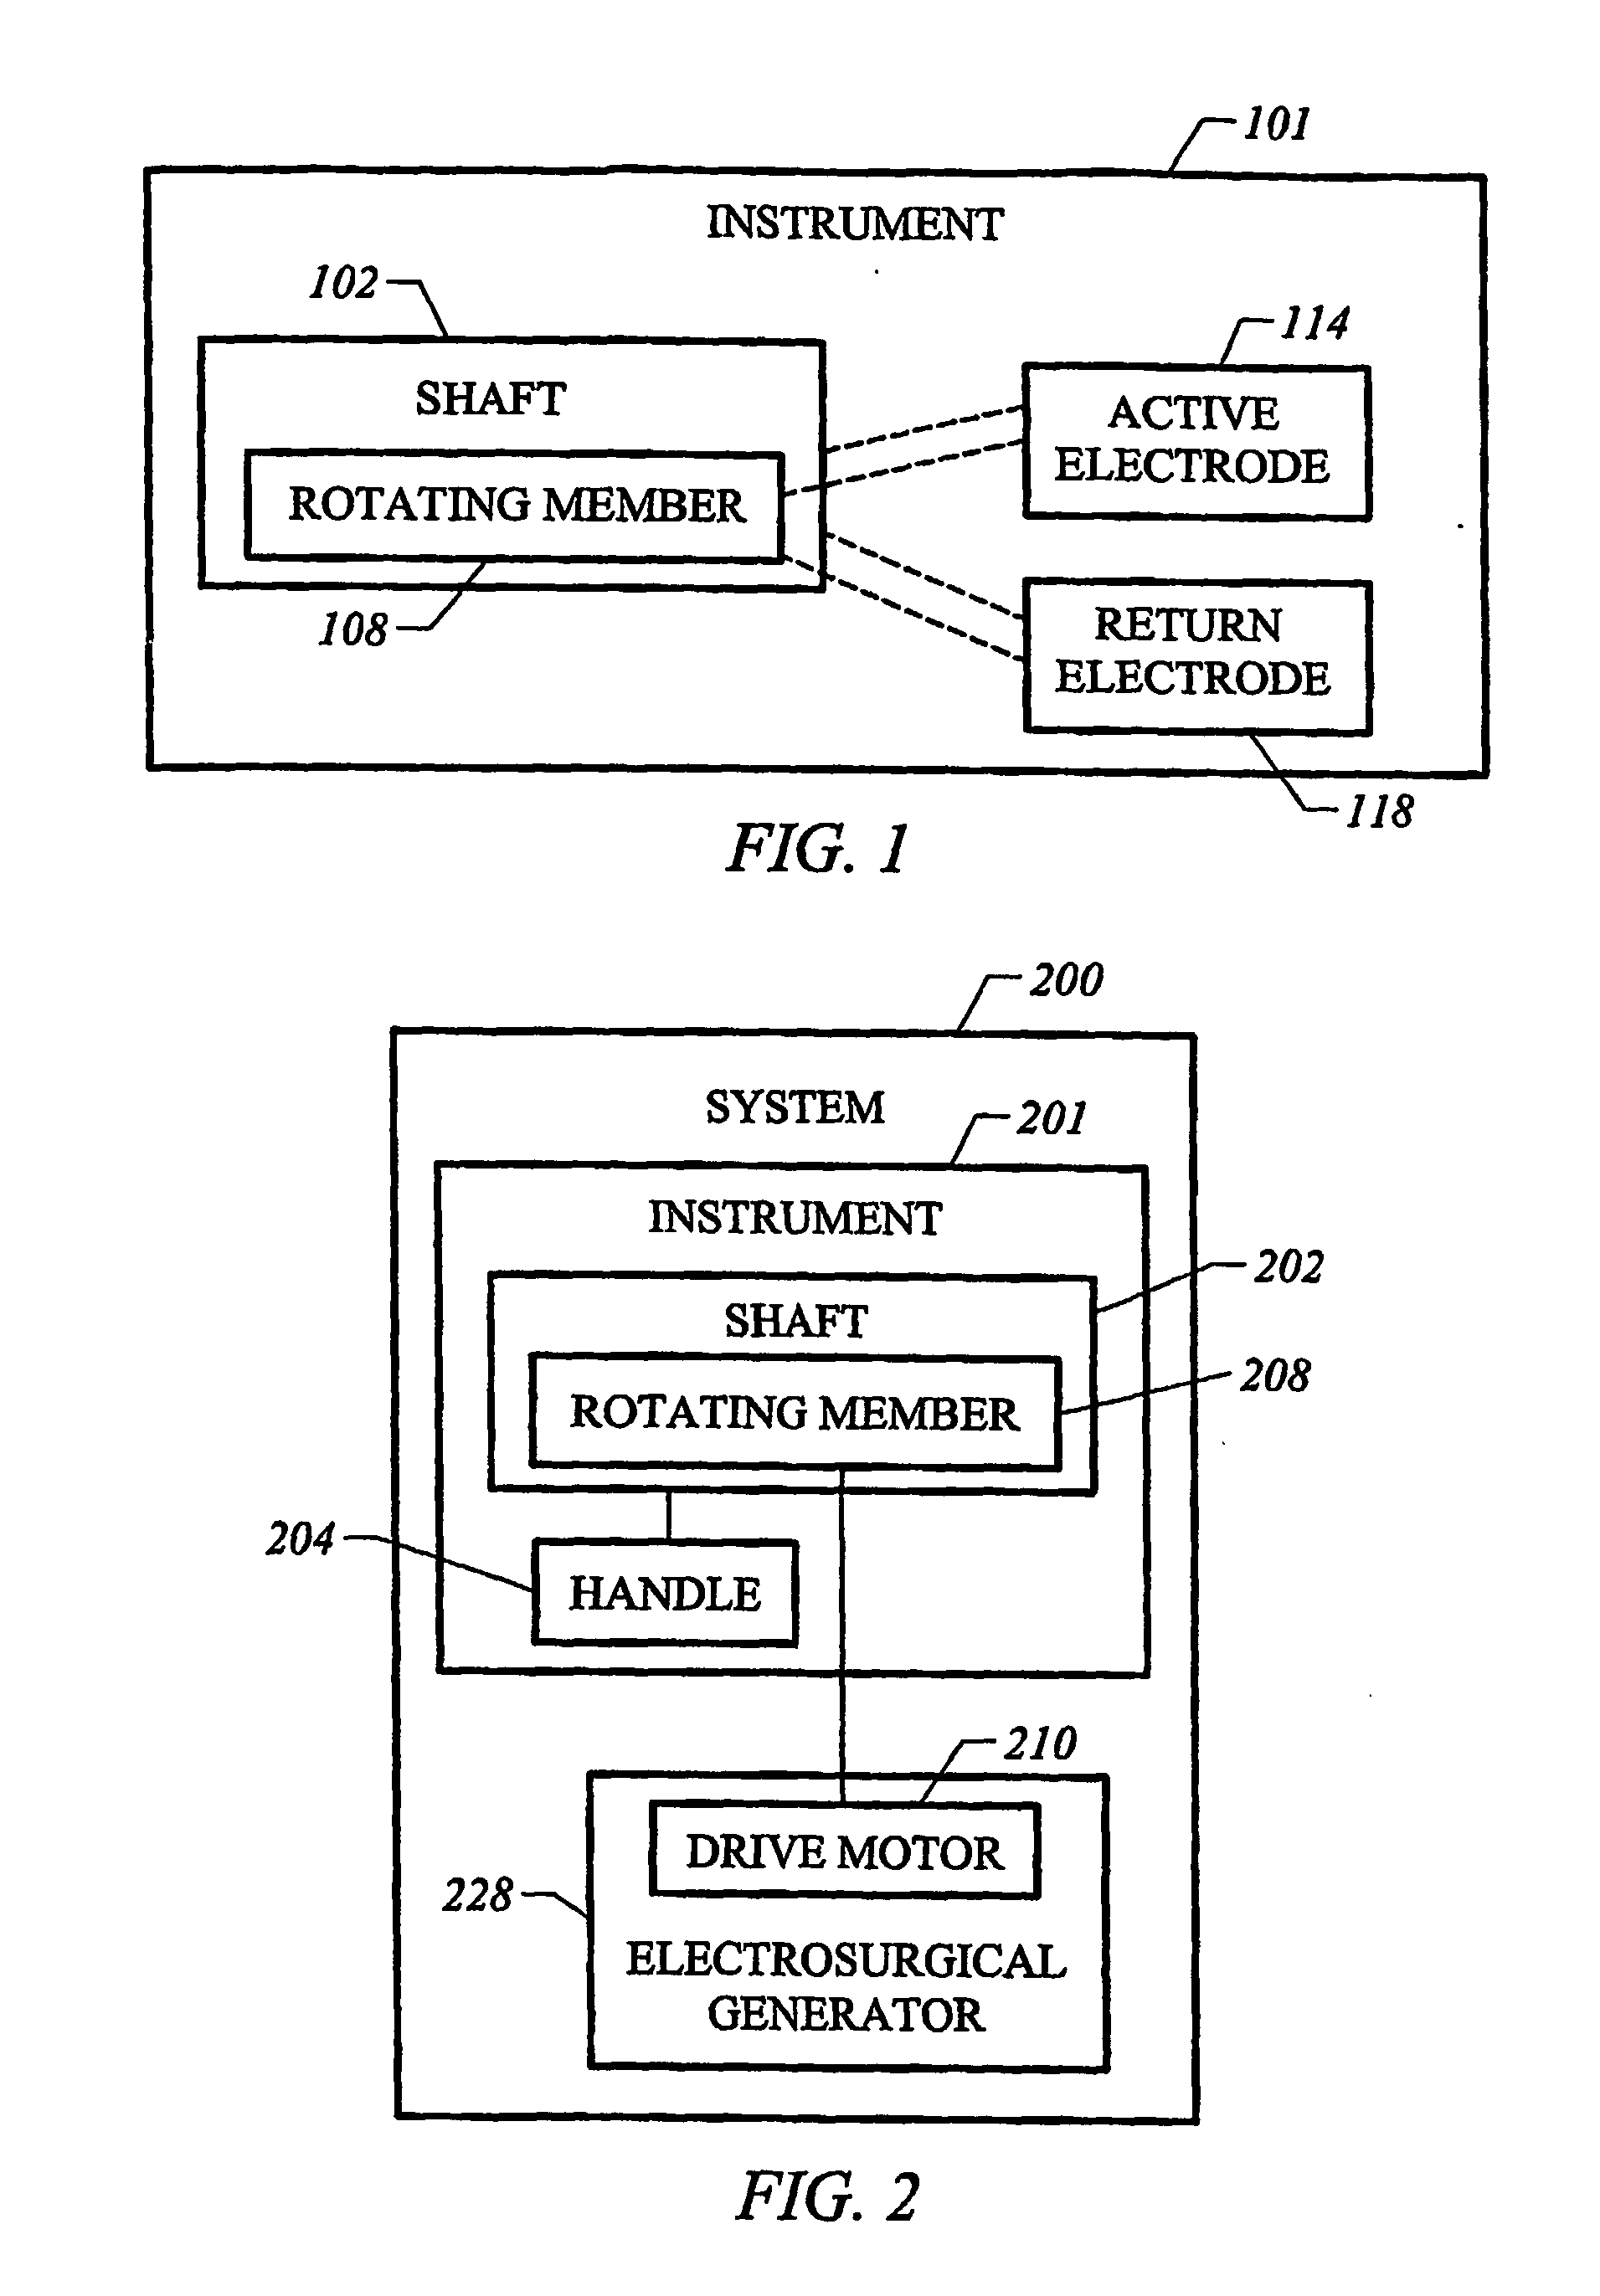 Rotary electrosurgical apparatus and methods thereof